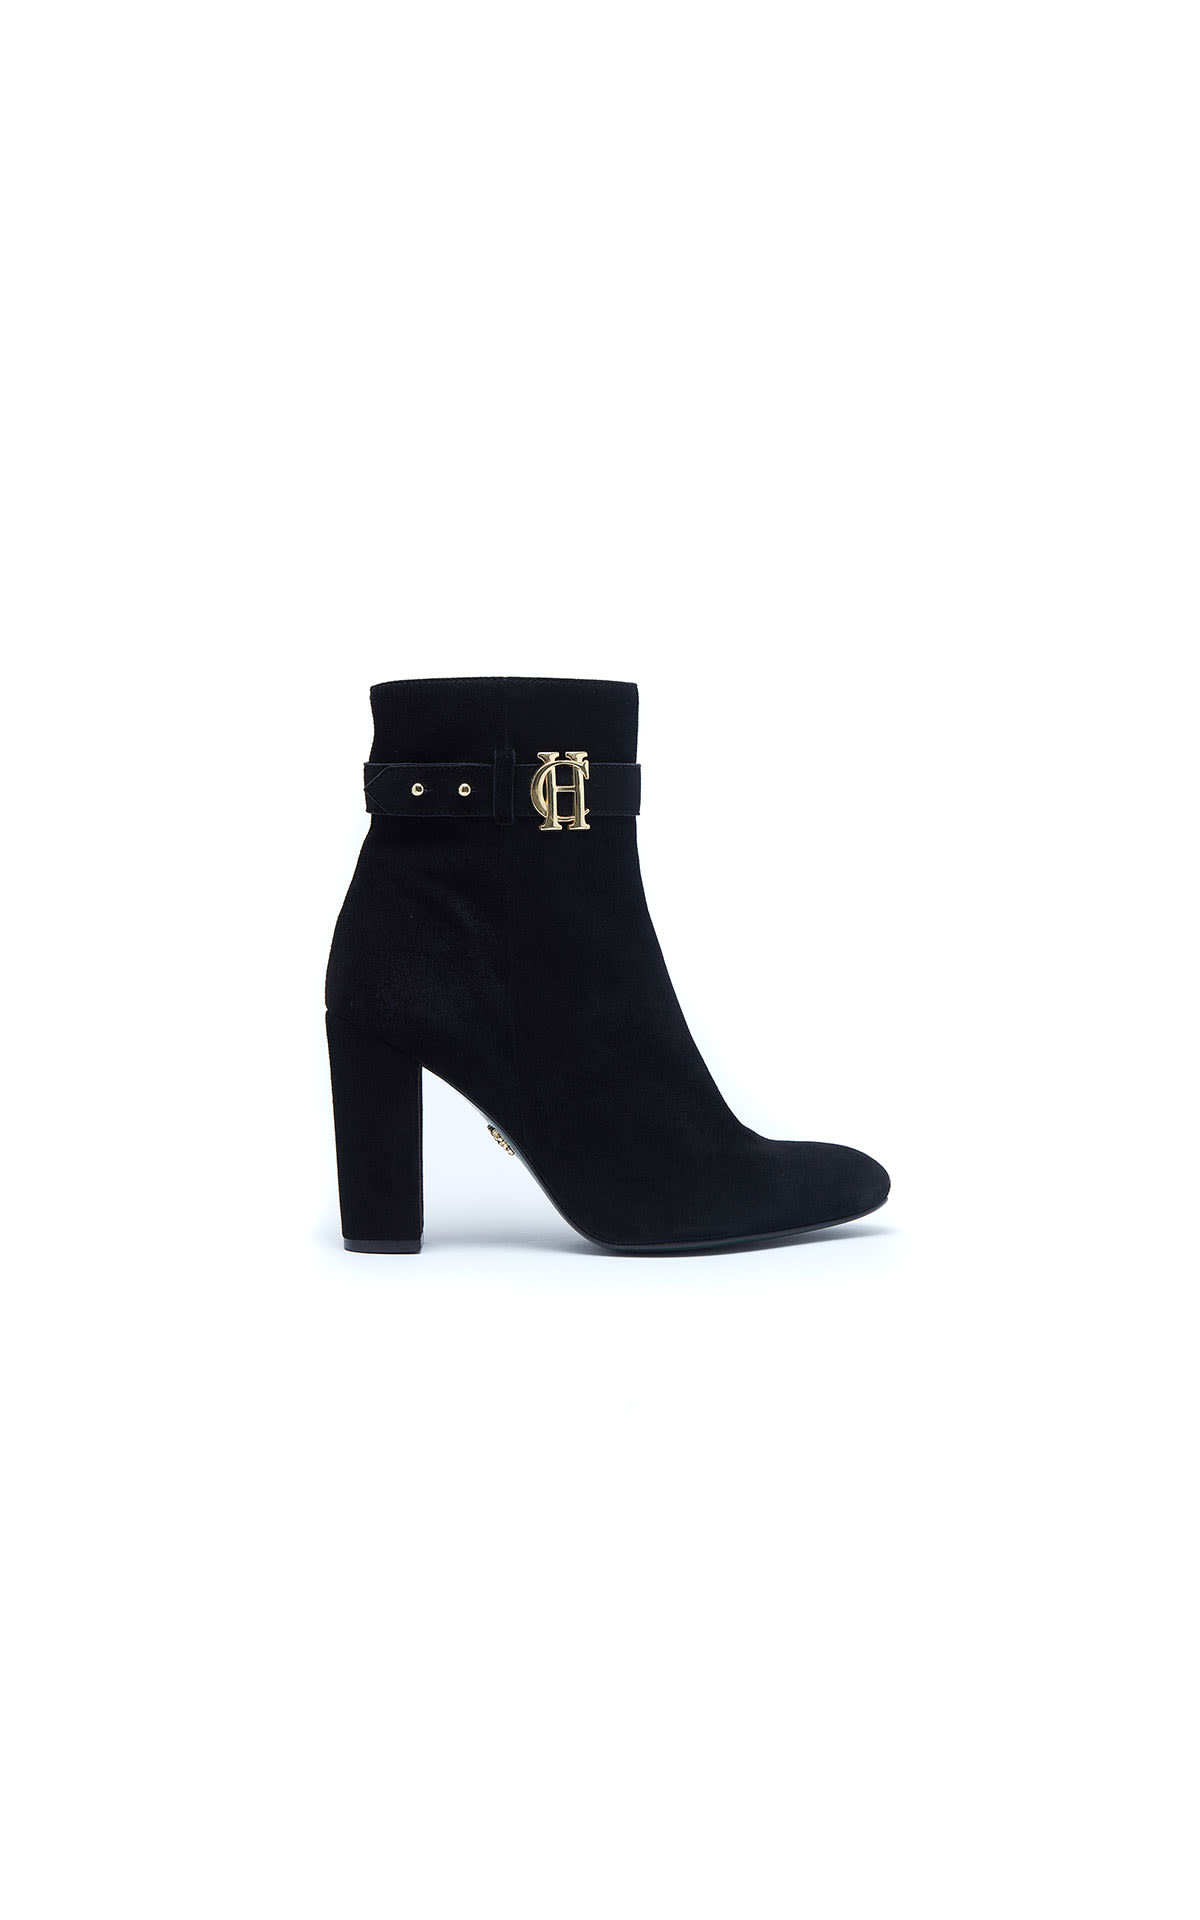 Holland Cooper Mayfair suede ankle boot from Bicester Village